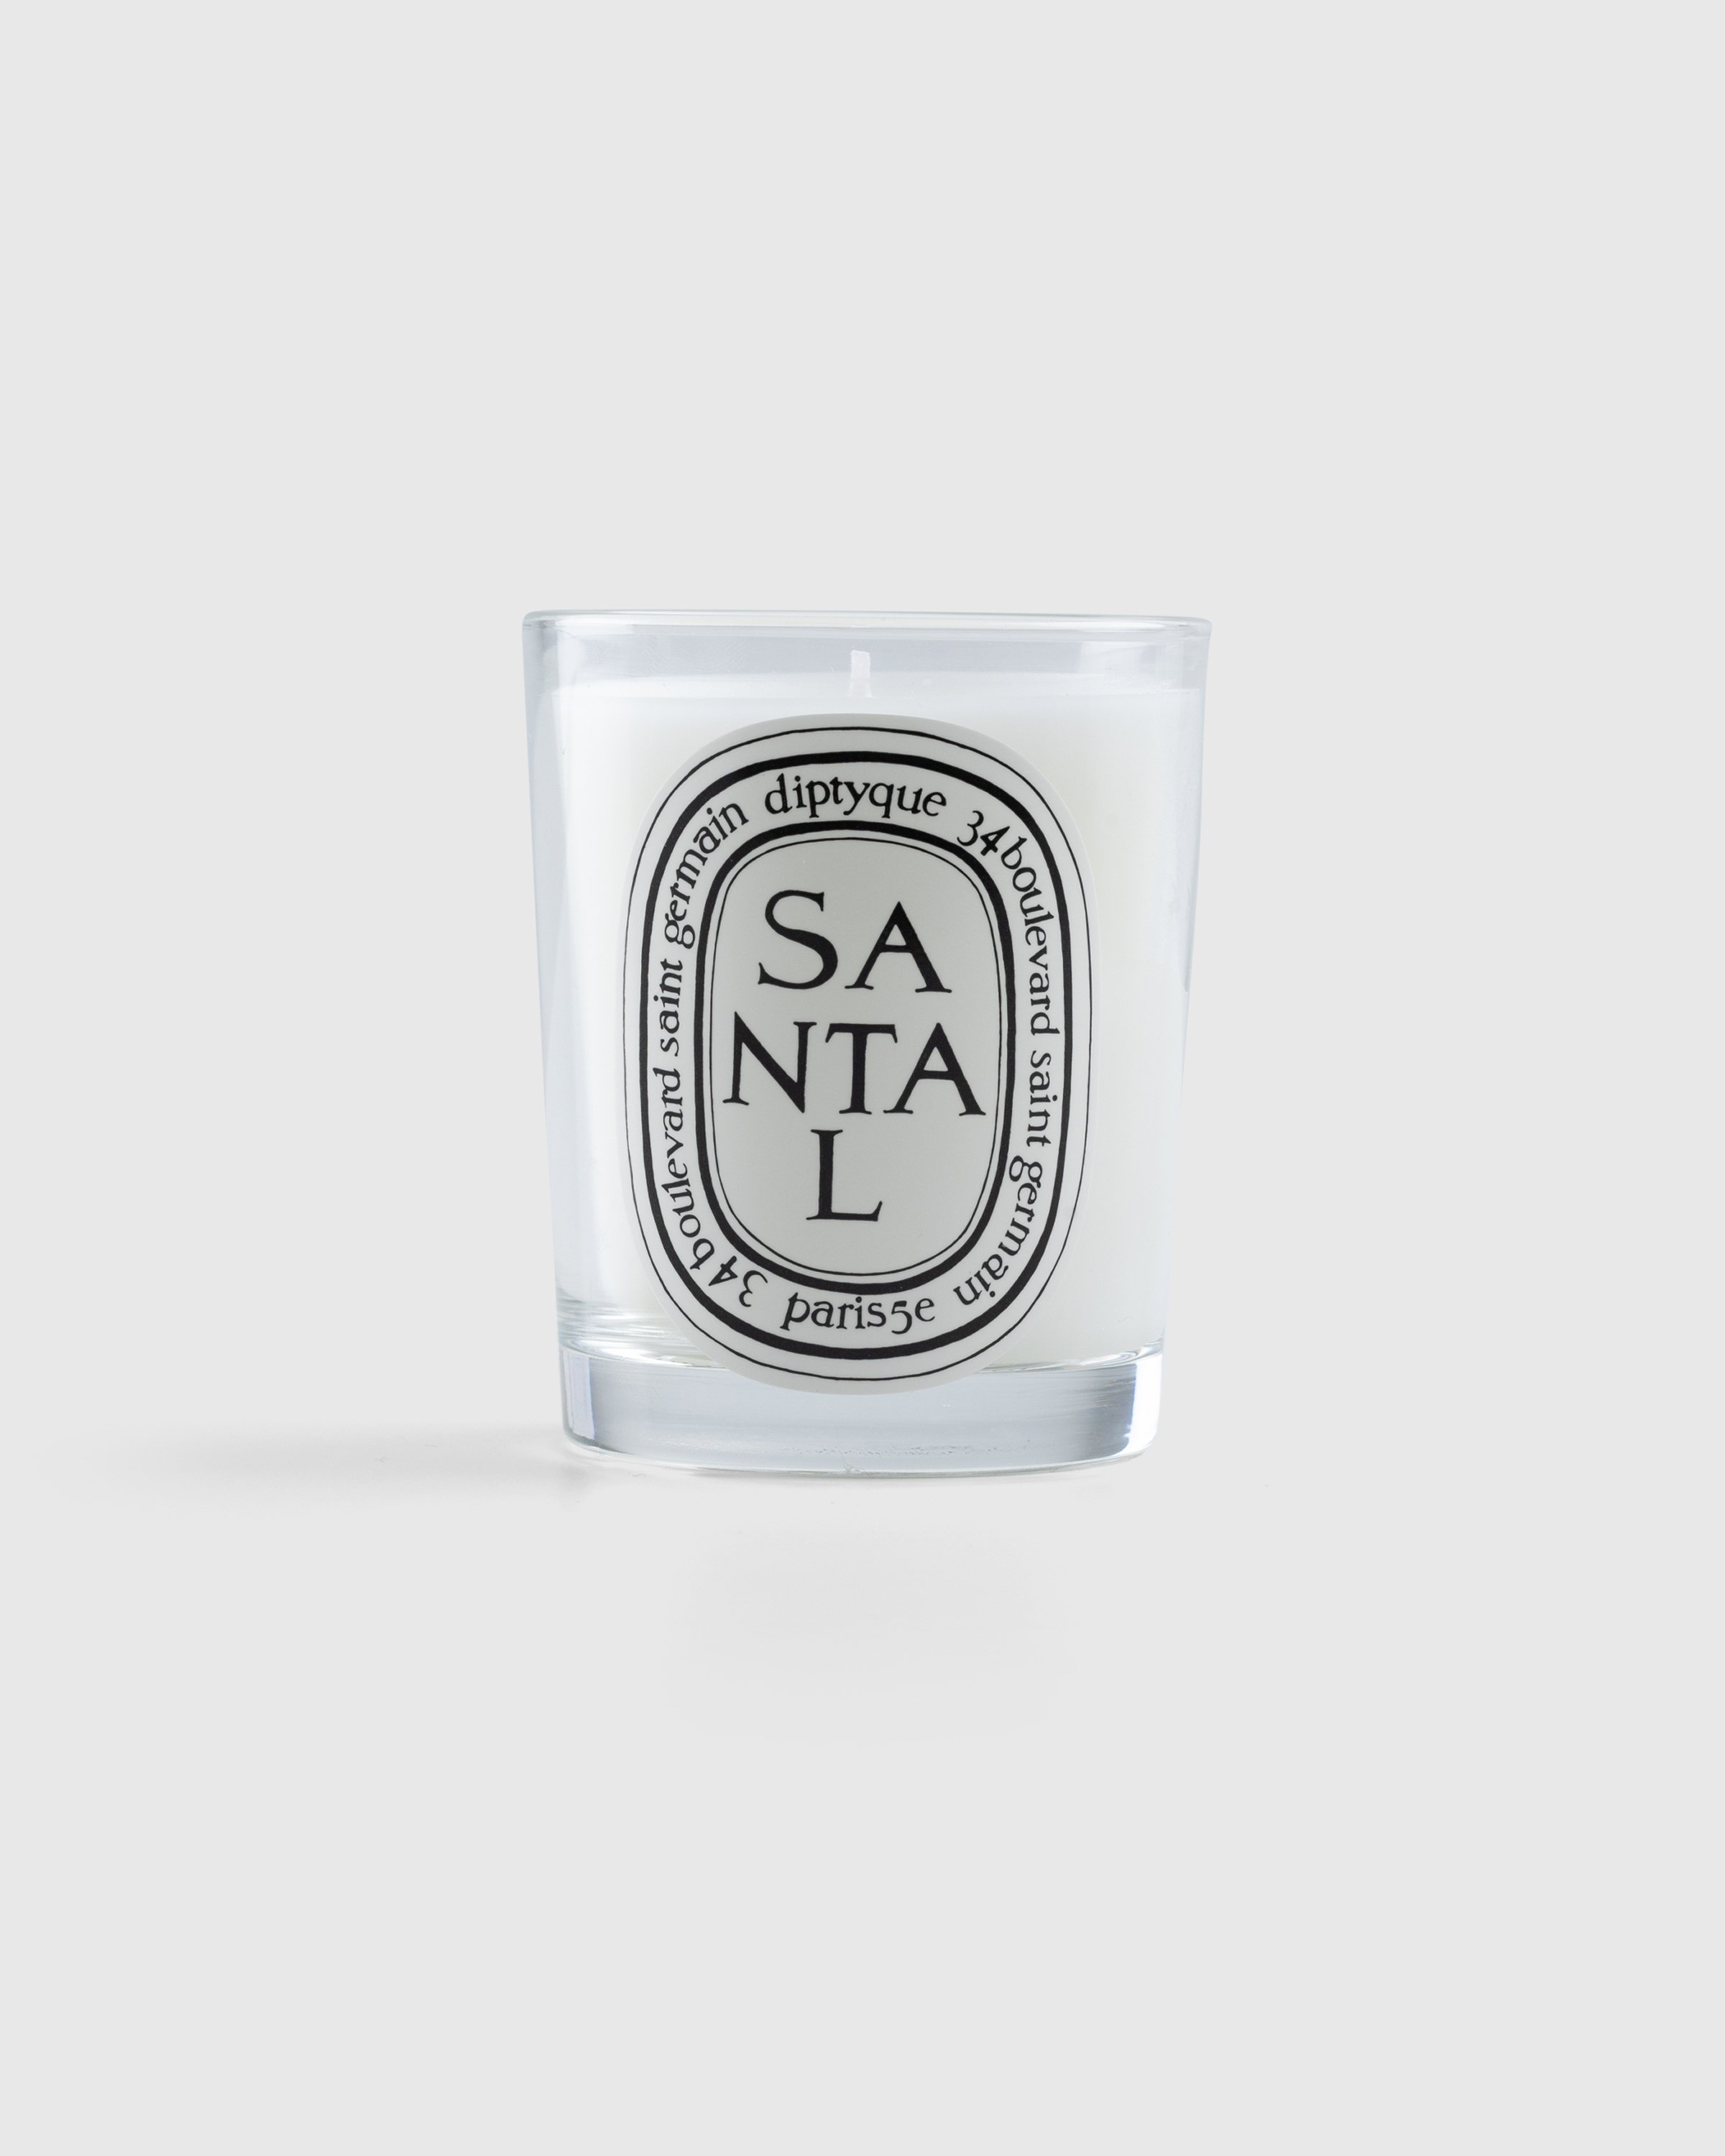 Diptyque - Standard Candle Santal 190g - Lifestyle - White - Image 1